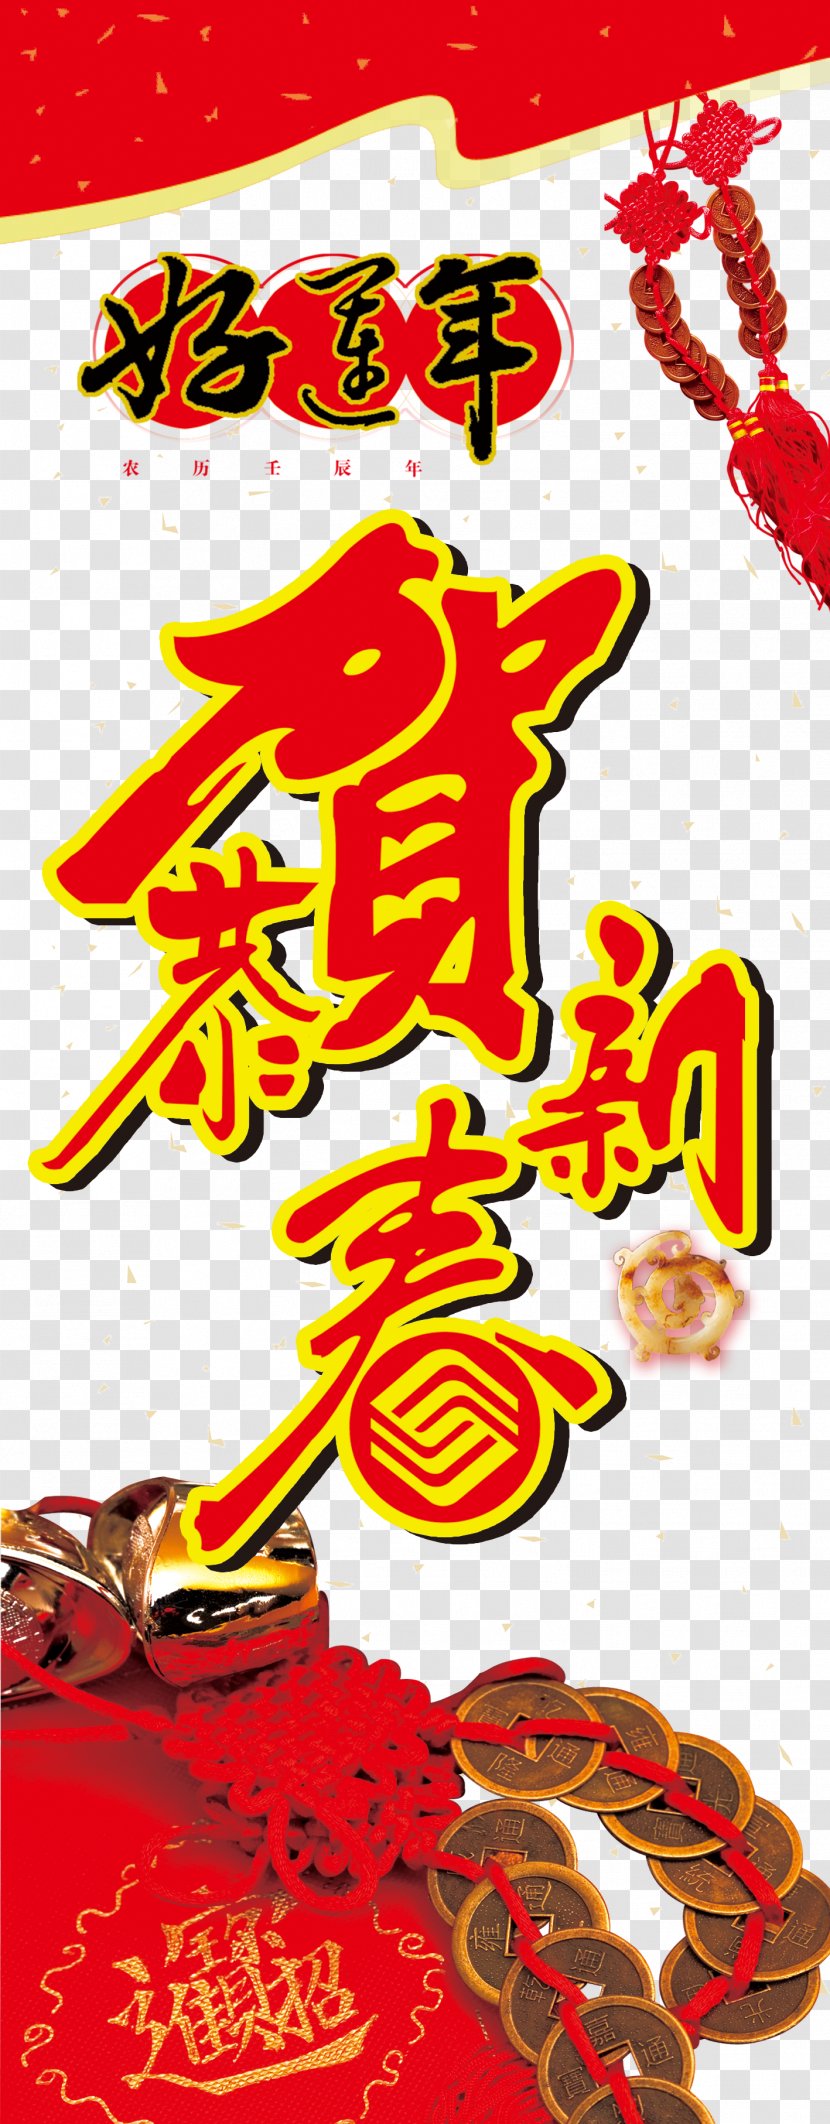 Chinese New Year Luck - Area - Lunar Good Poster Transparent PNG